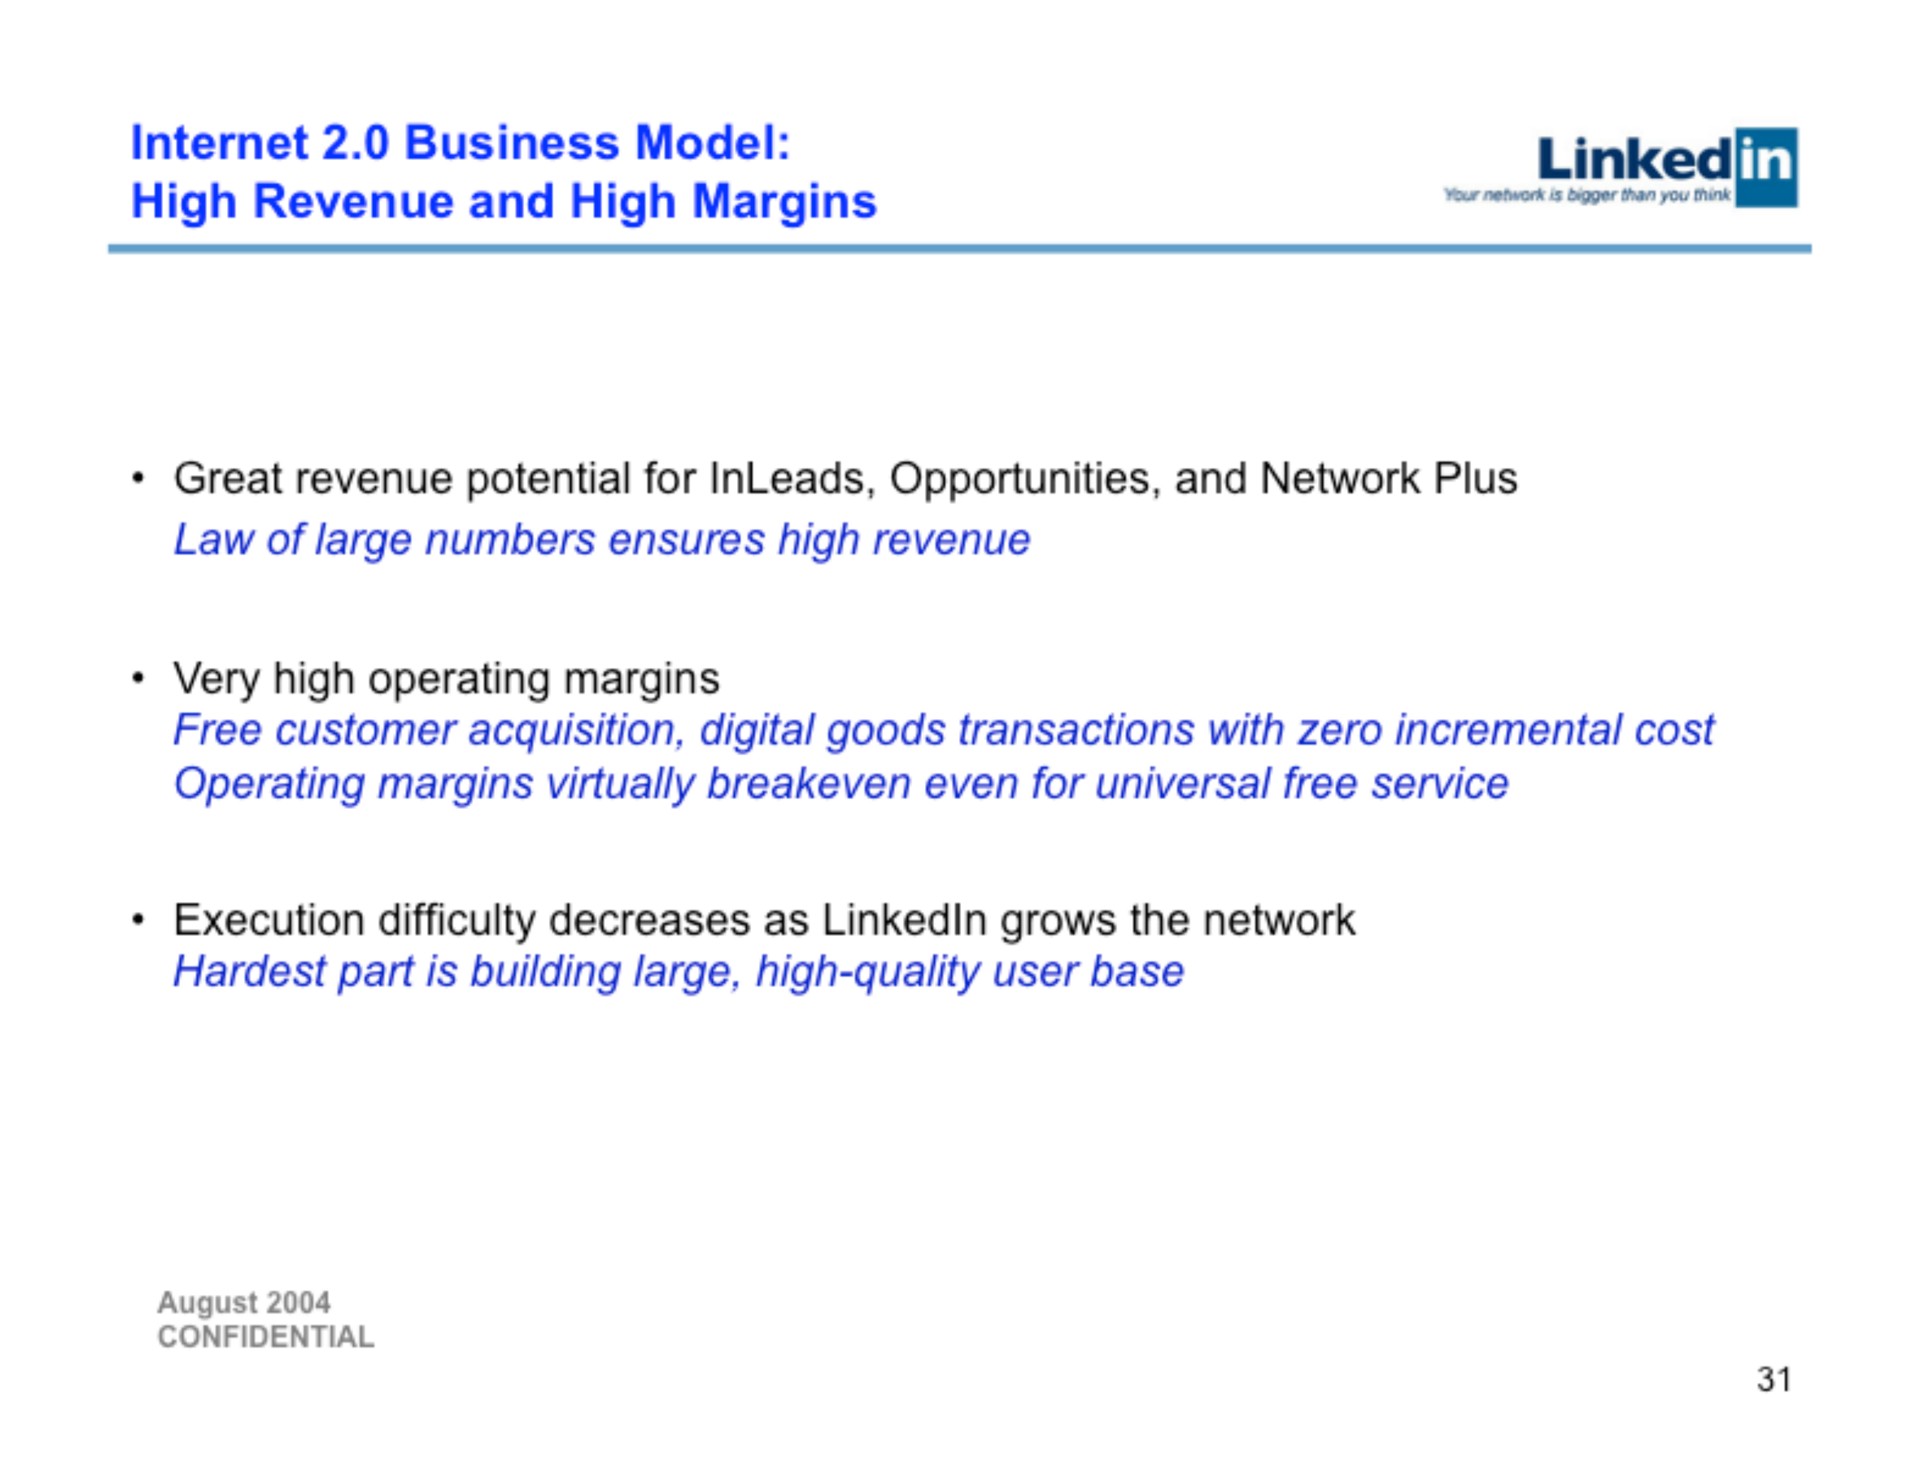 business model high revenue and high margins linked than you your great revenue potential for opportunities and network plus law of large numbers ensures high revenue very high operating margins free customer acquisition digital goods transactions with zero incremental cost operating margins virtually even for universal free service execution difficulty decreases as grows the network part is building large high quality user base | Linkedin